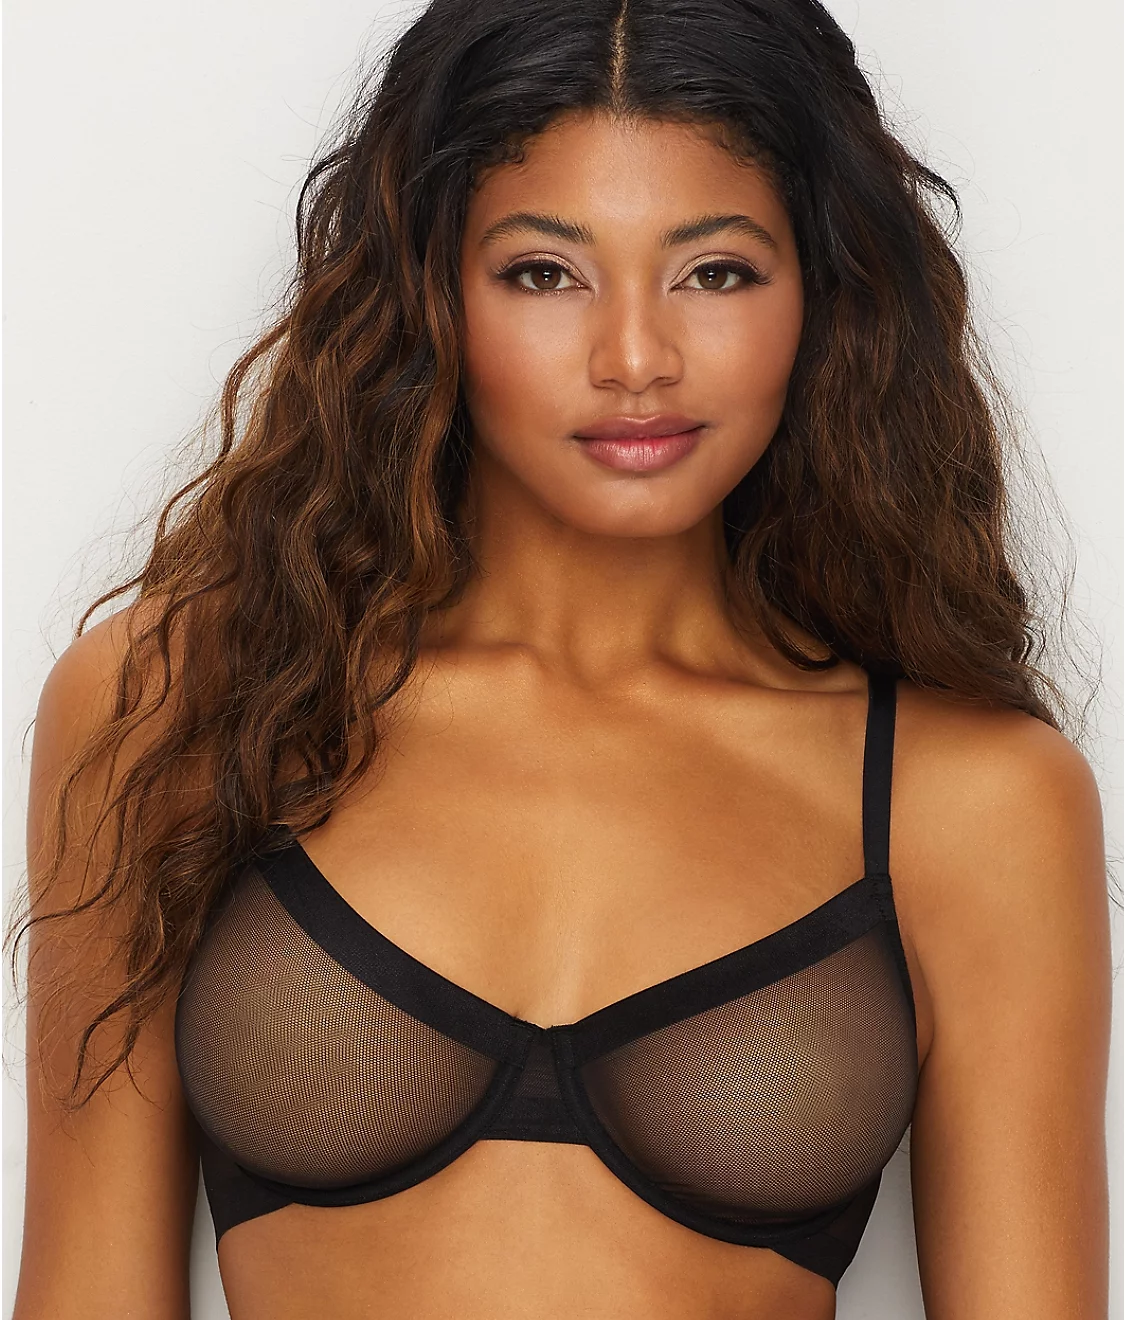 brad dent recommends totally see through bras pic